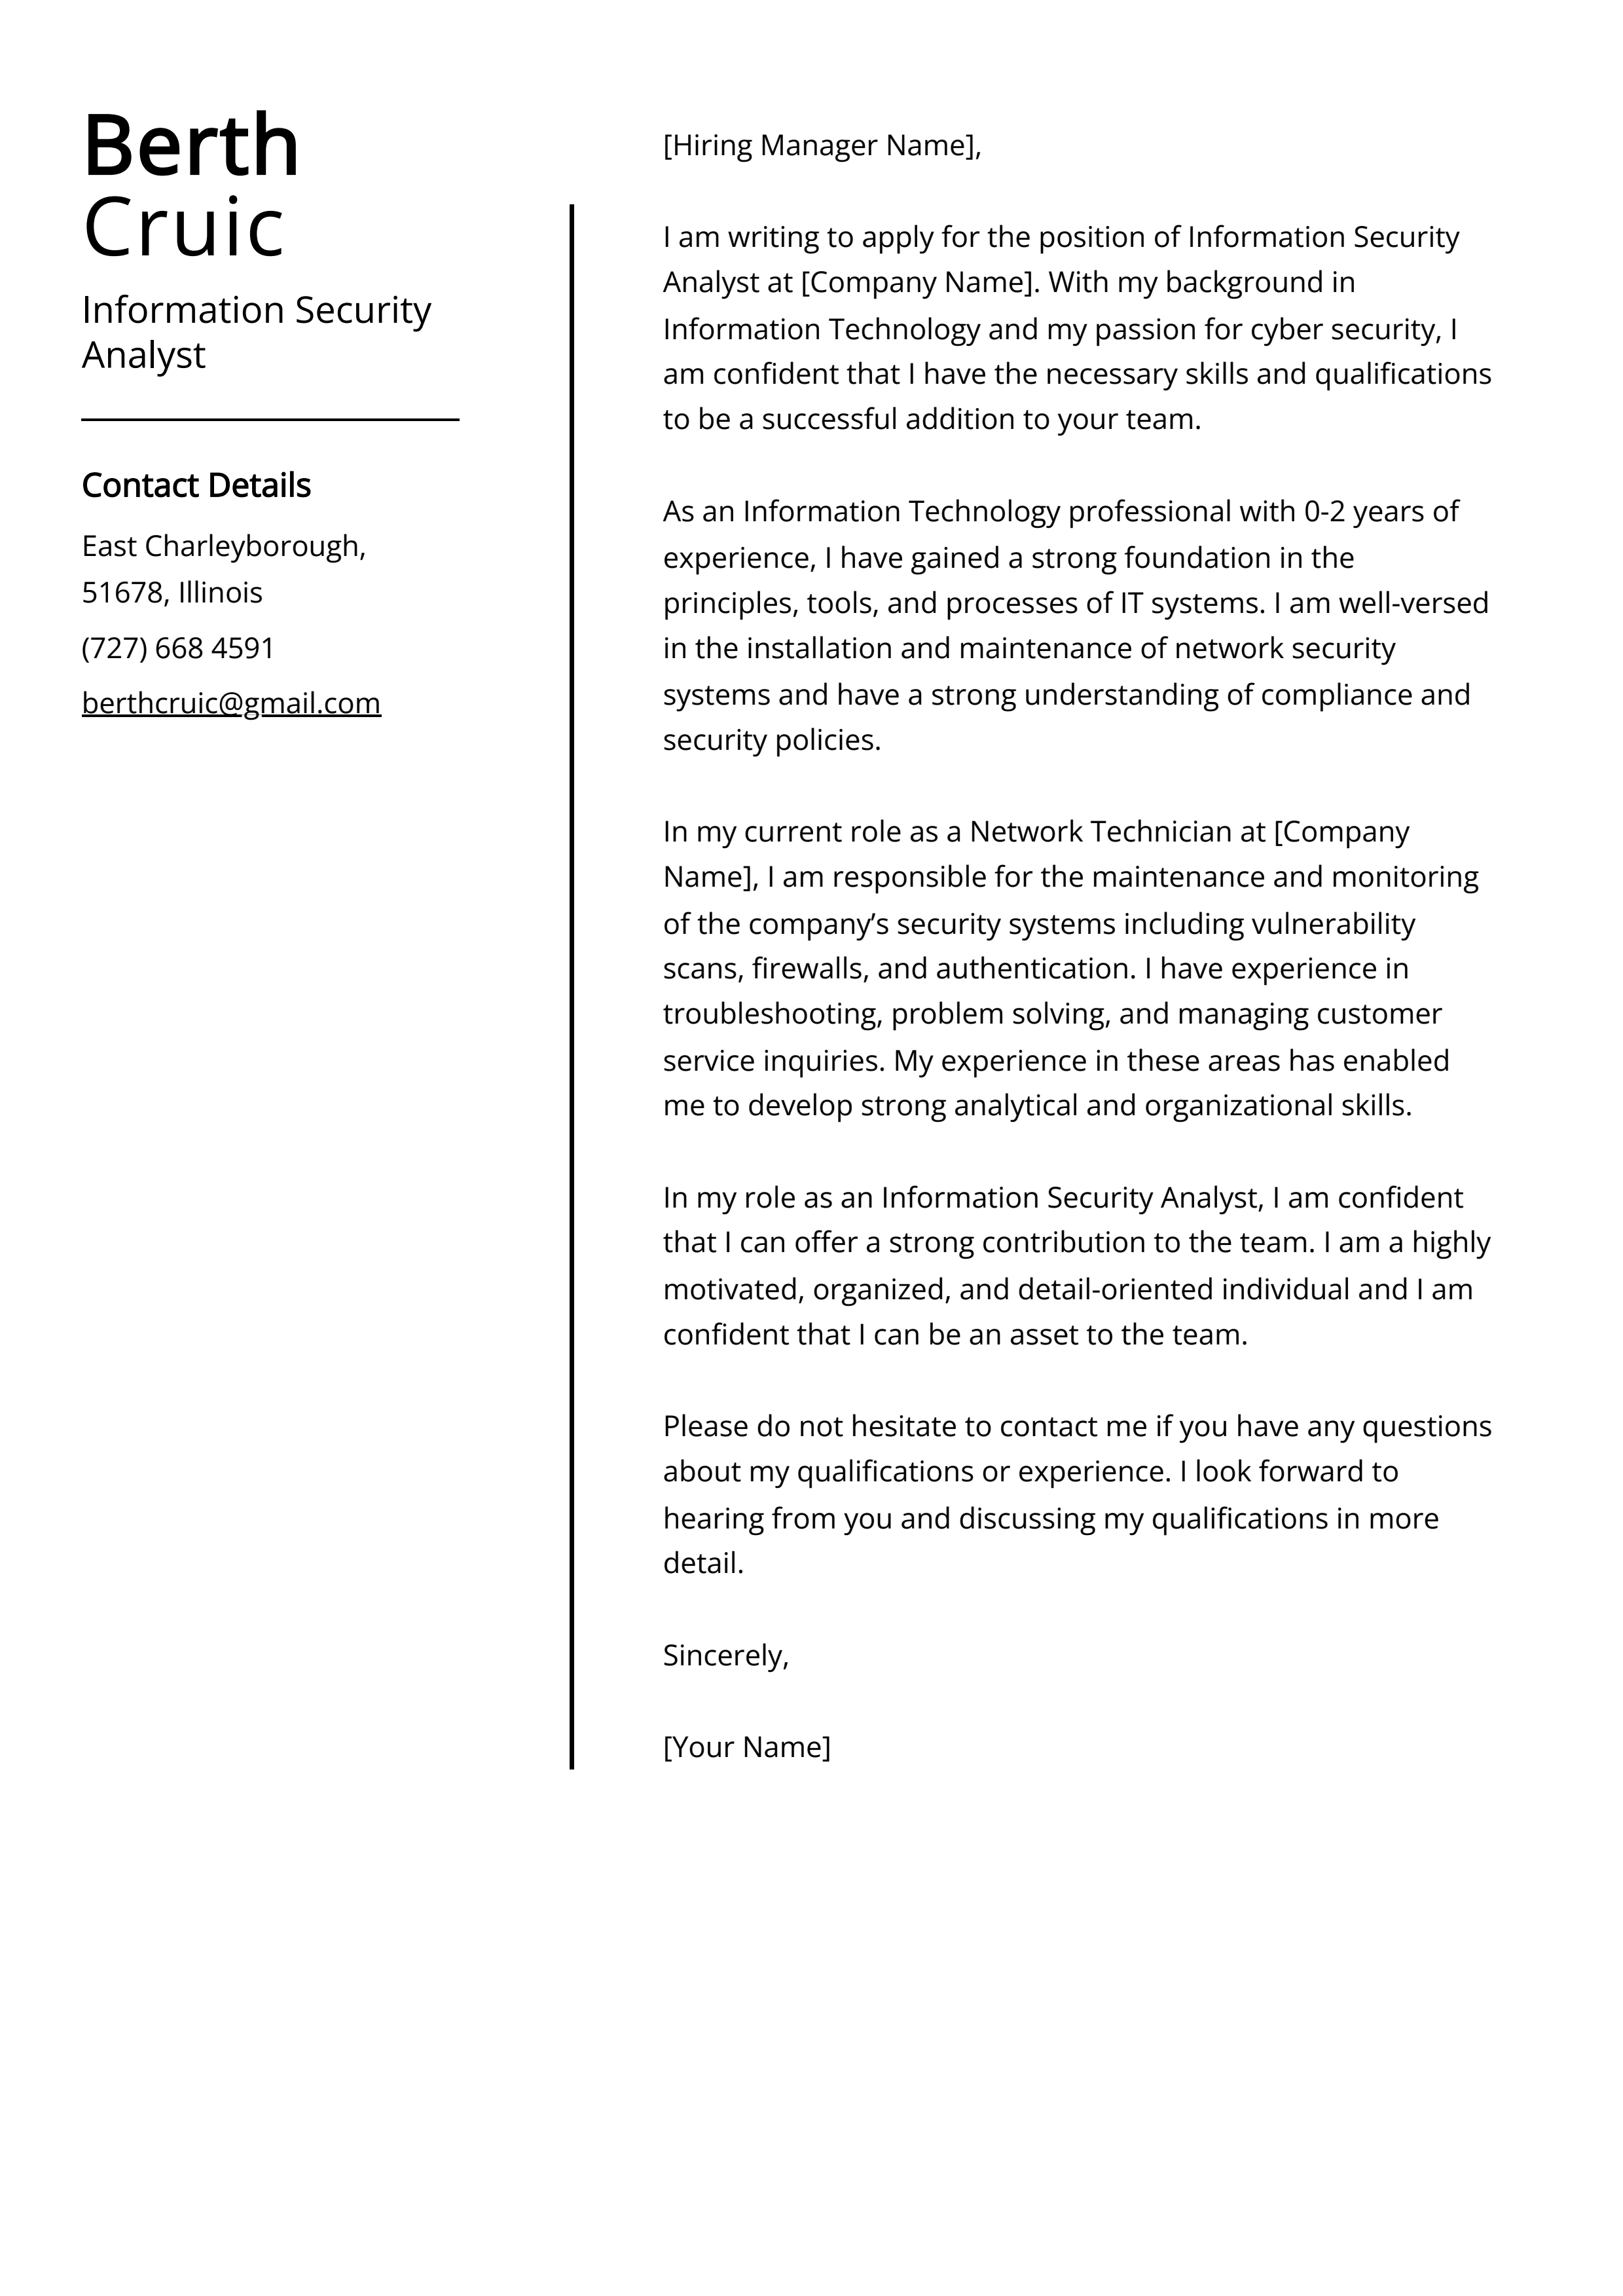 Information Security Analyst Cover Letter Example